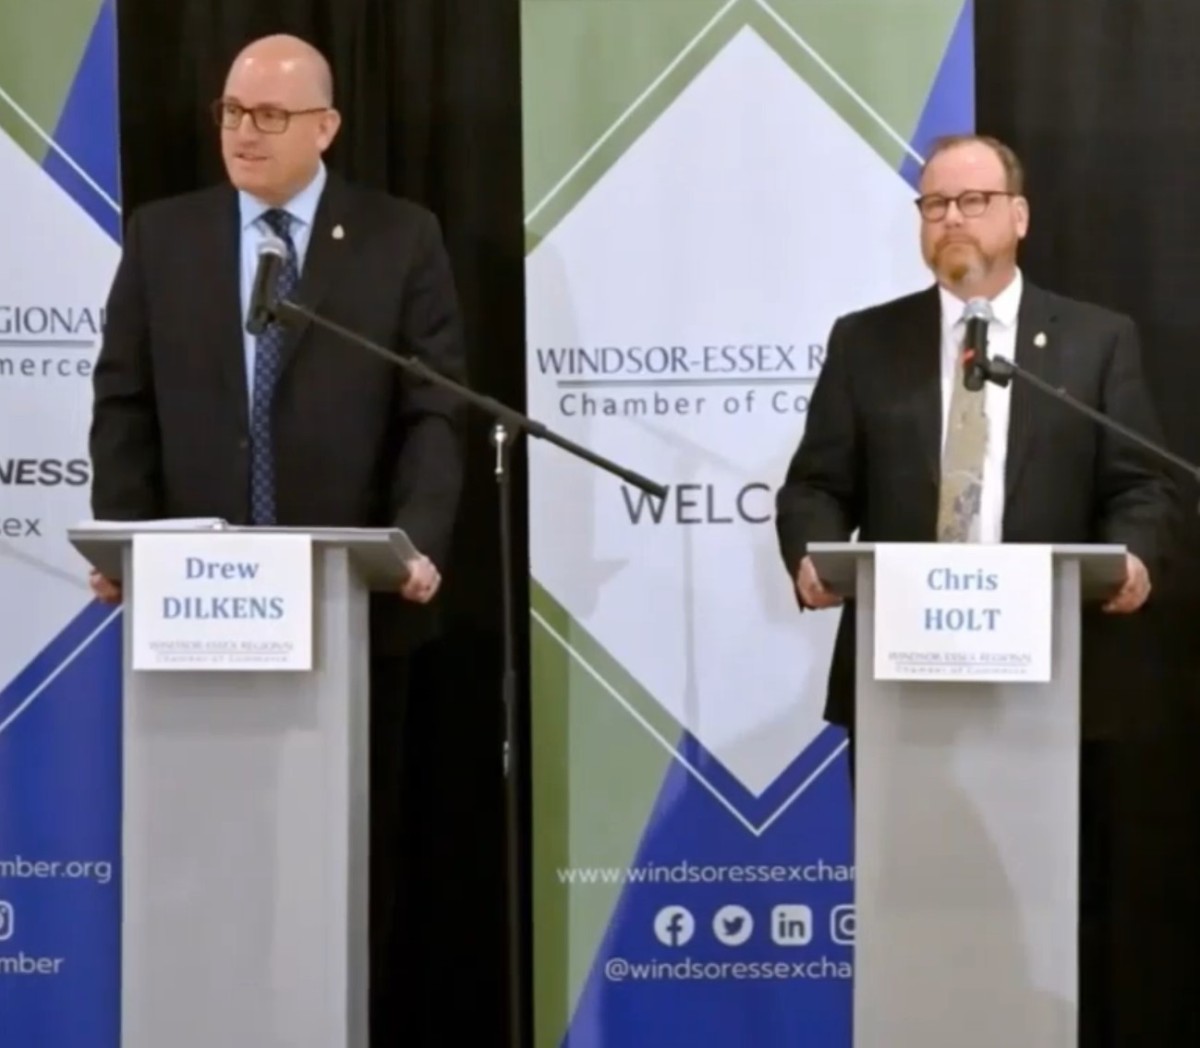 Chamber of Commerce Mayoral Debate Drew Dilkens and Chris Holt